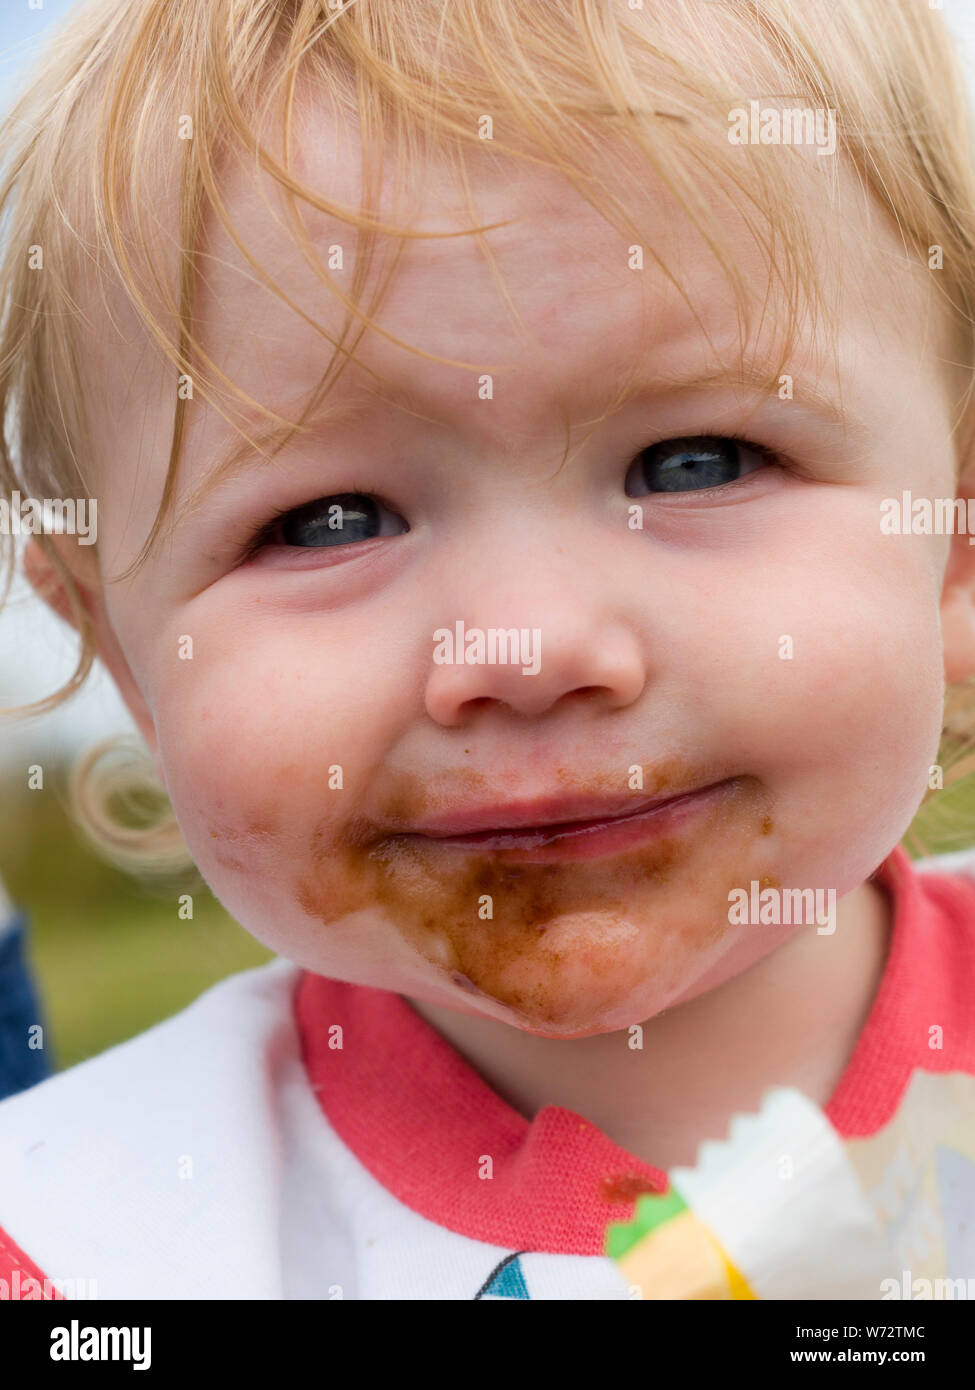 Toddler with dirty face after eating chocolate, UK Stock Photo